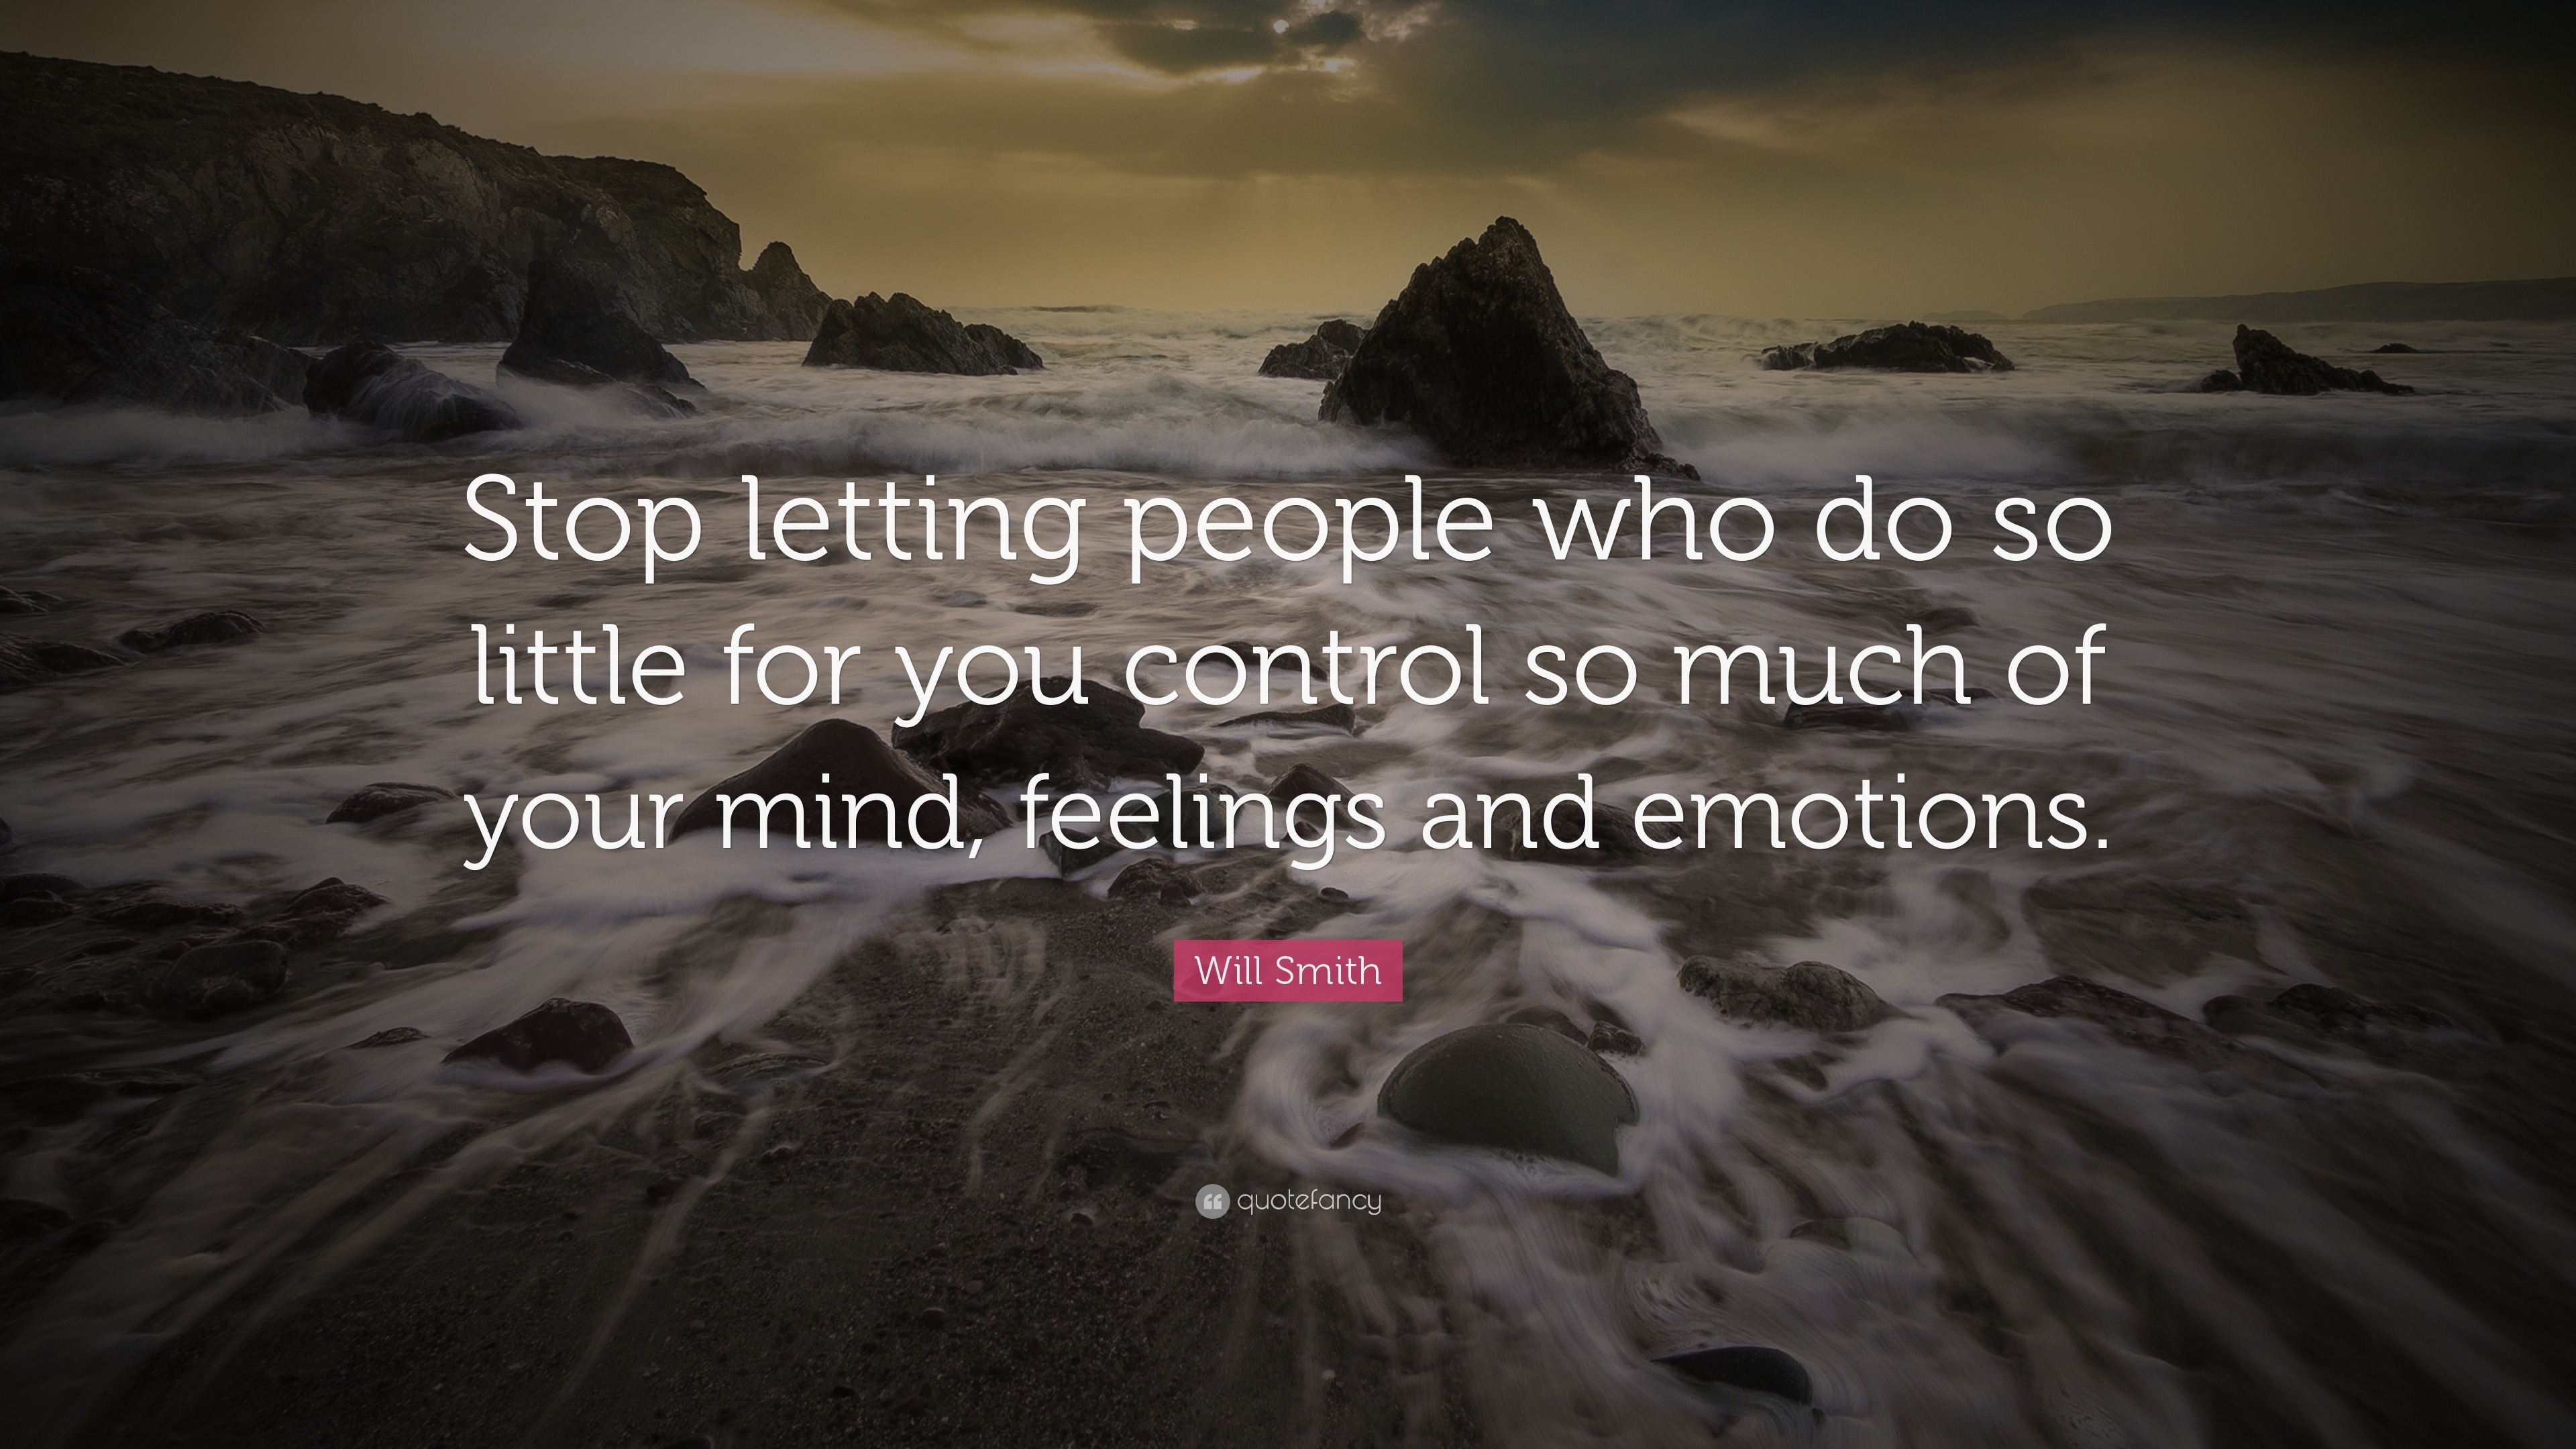 Will Smith Quote “Stop letting people who do so little for you control so